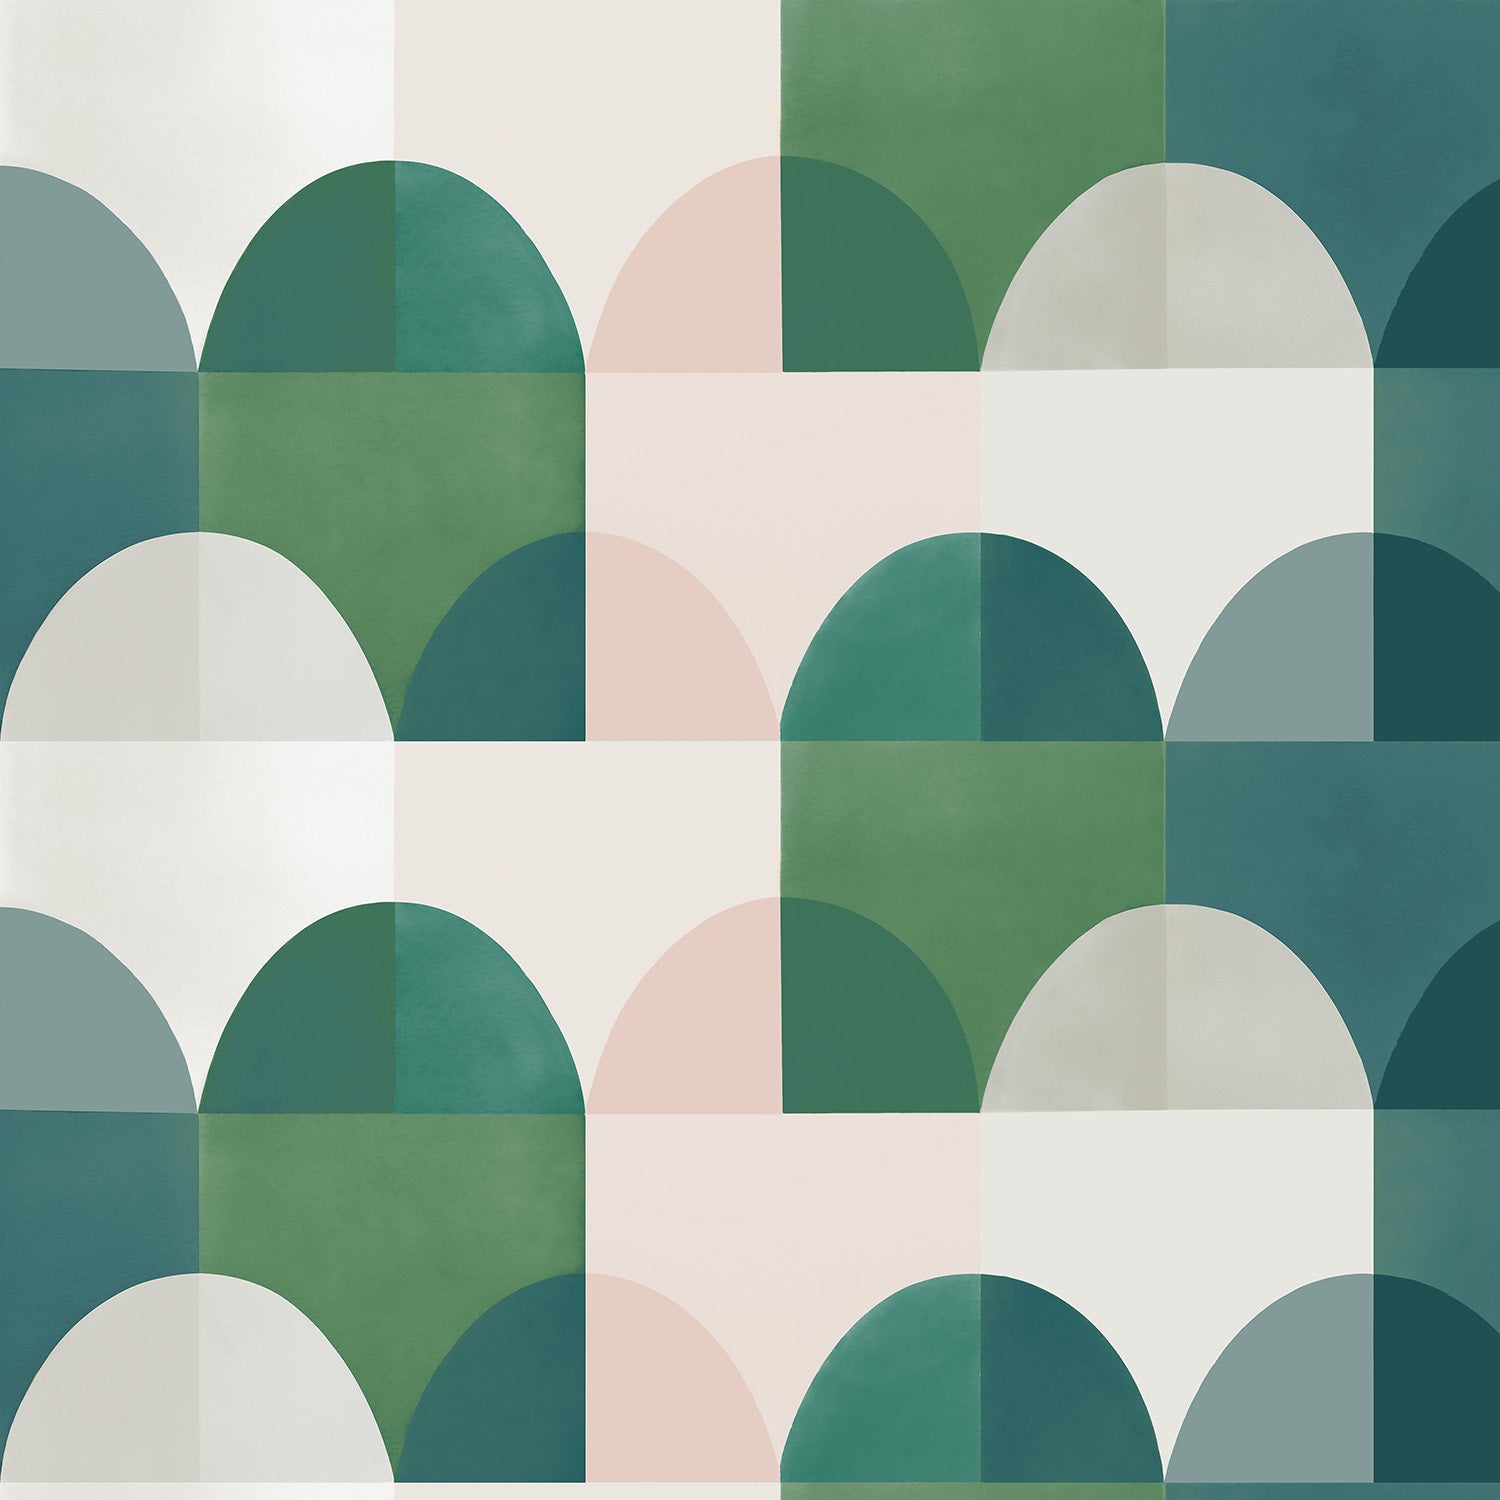 Detail of wallpaper in a curvy geometric print in shades of white, pink, blue and green.